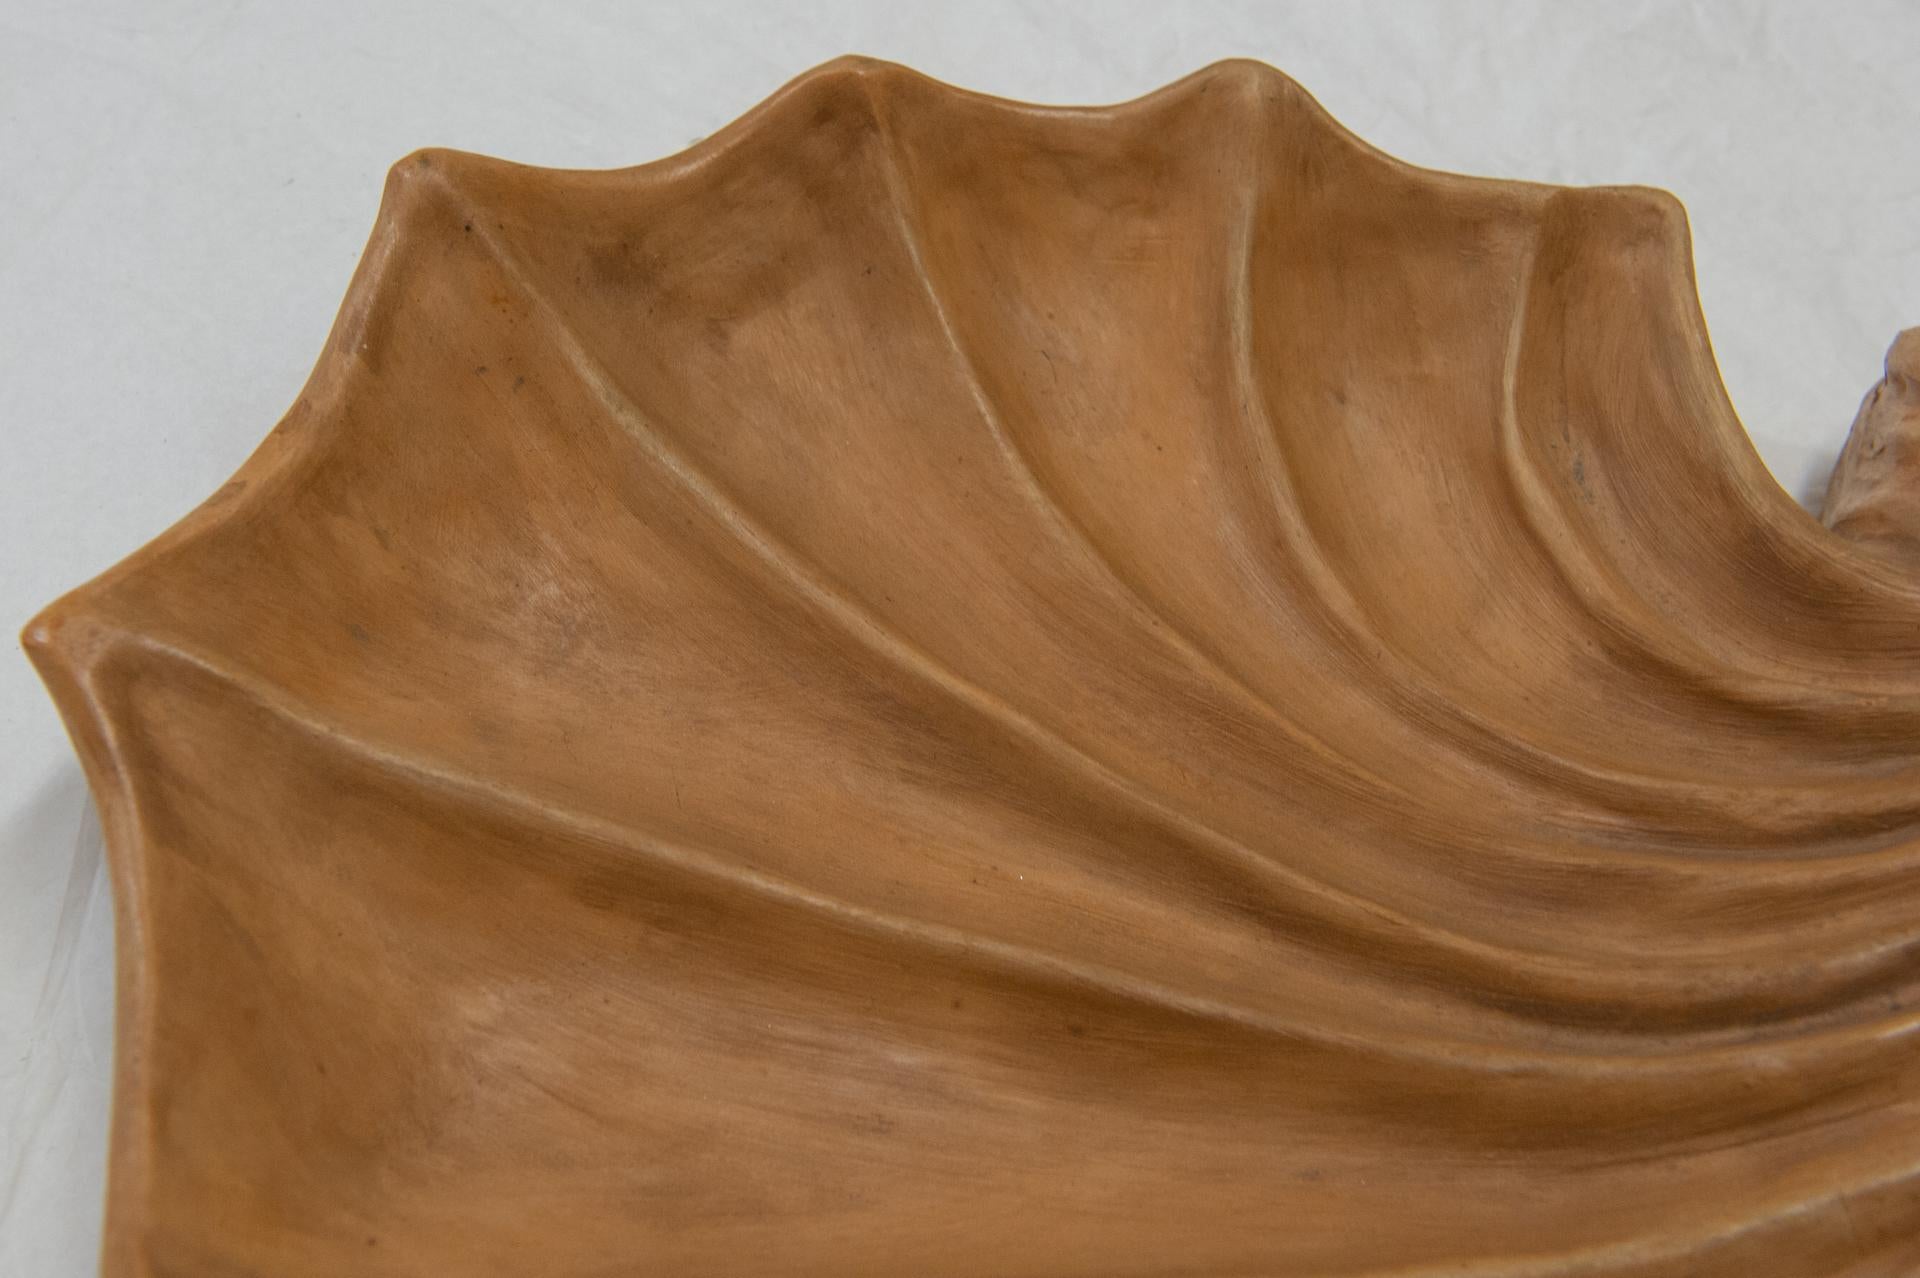 Italian Terracotta Plate Modeled by Hand in the Shape of a Shell For Sale